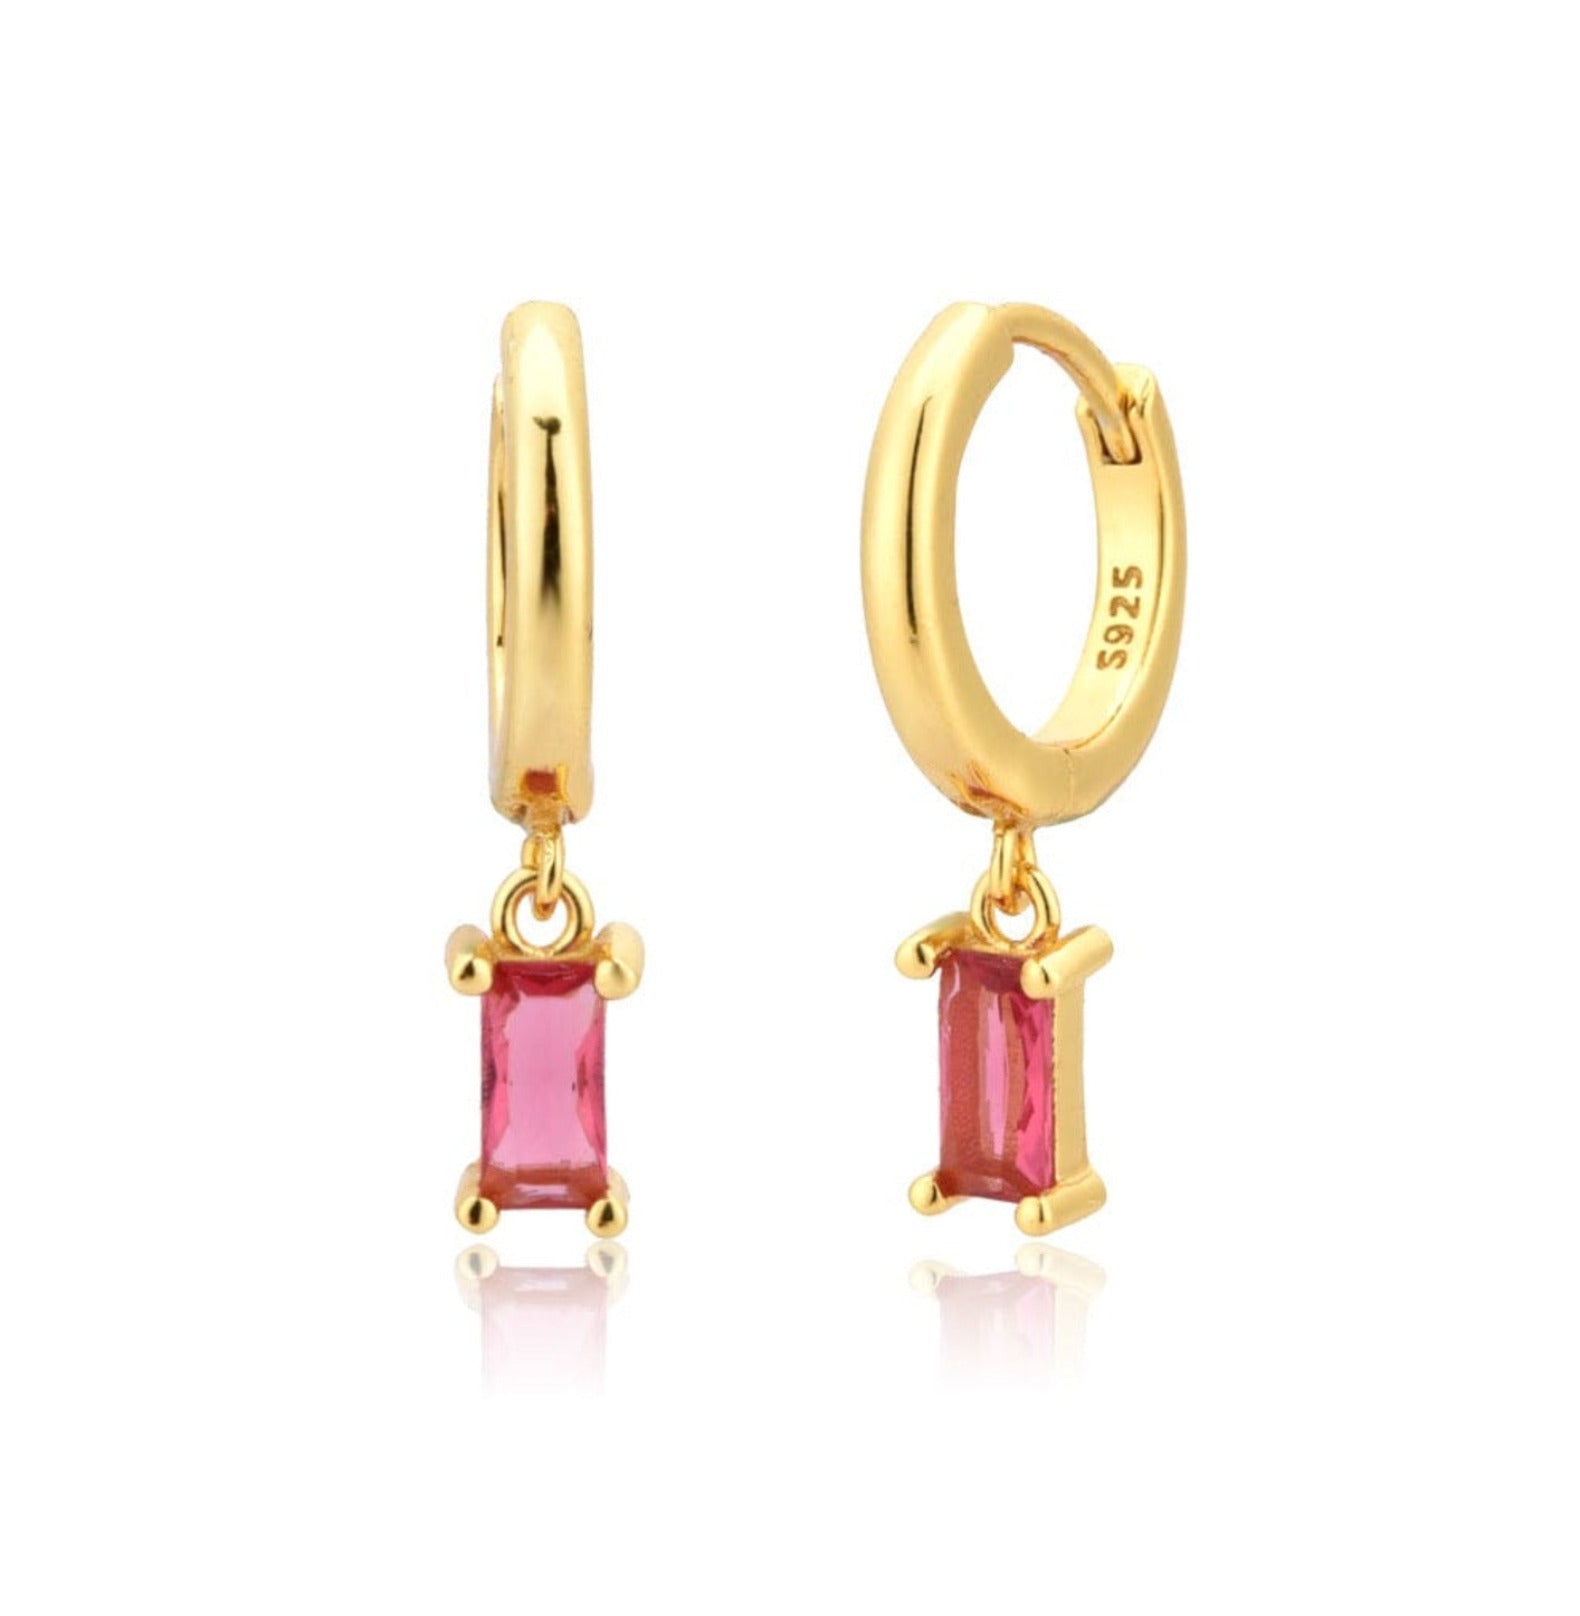 DAINTY EARRINGS earing Yubama Jewelry Online Store - The Elegant Designs of Gold and Silver ! Rose 